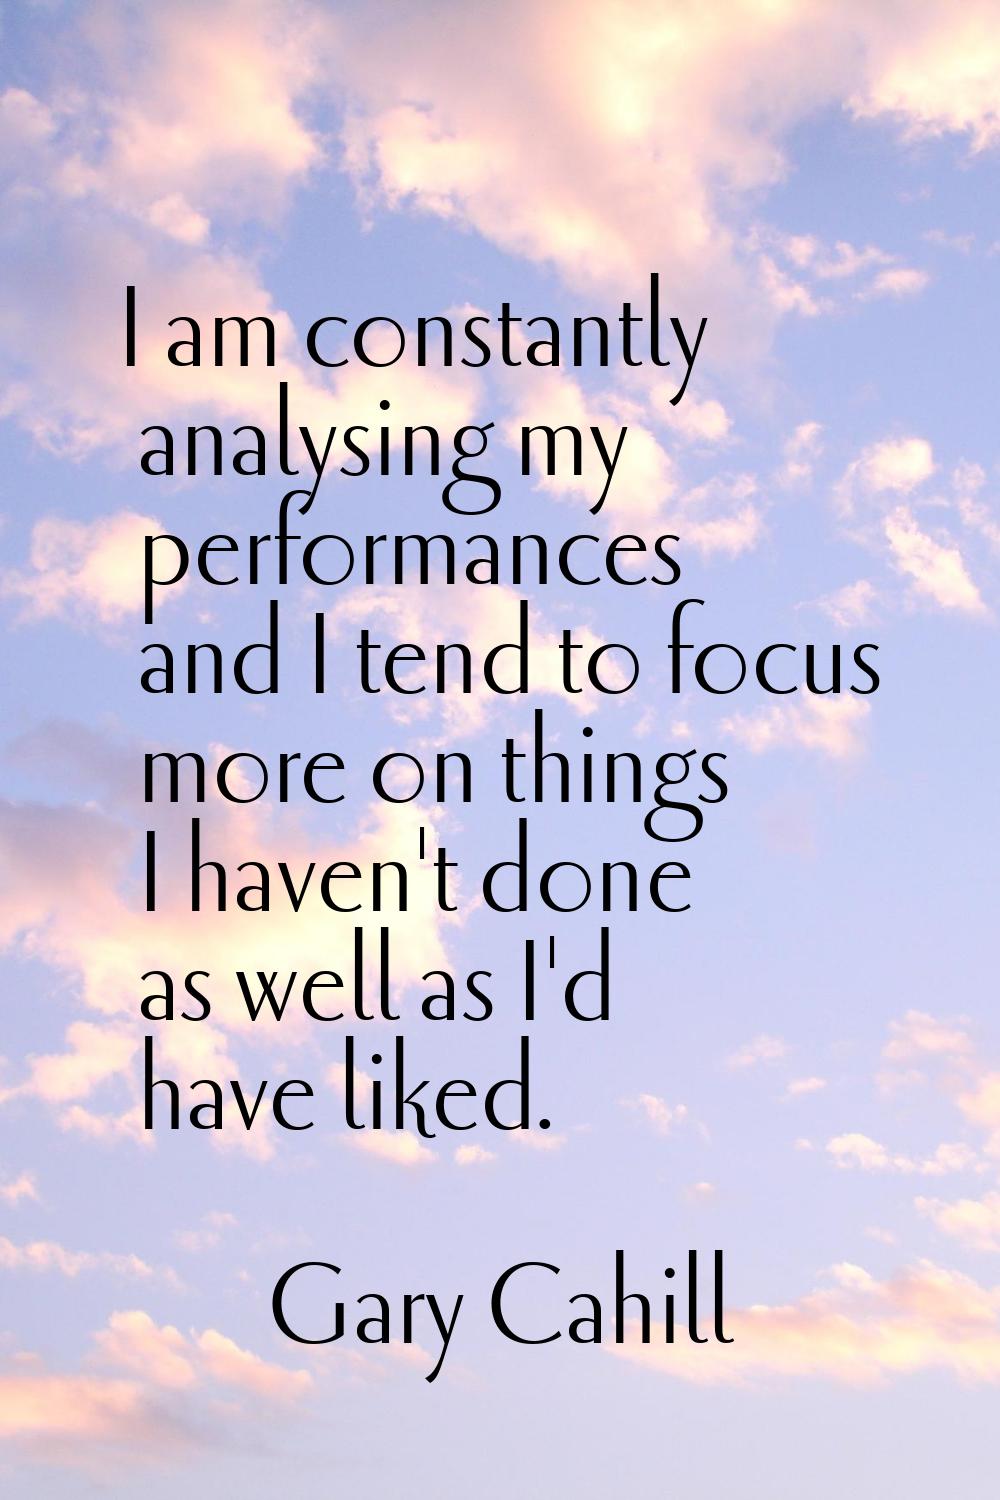 I am constantly analysing my performances and I tend to focus more on things I haven't done as well